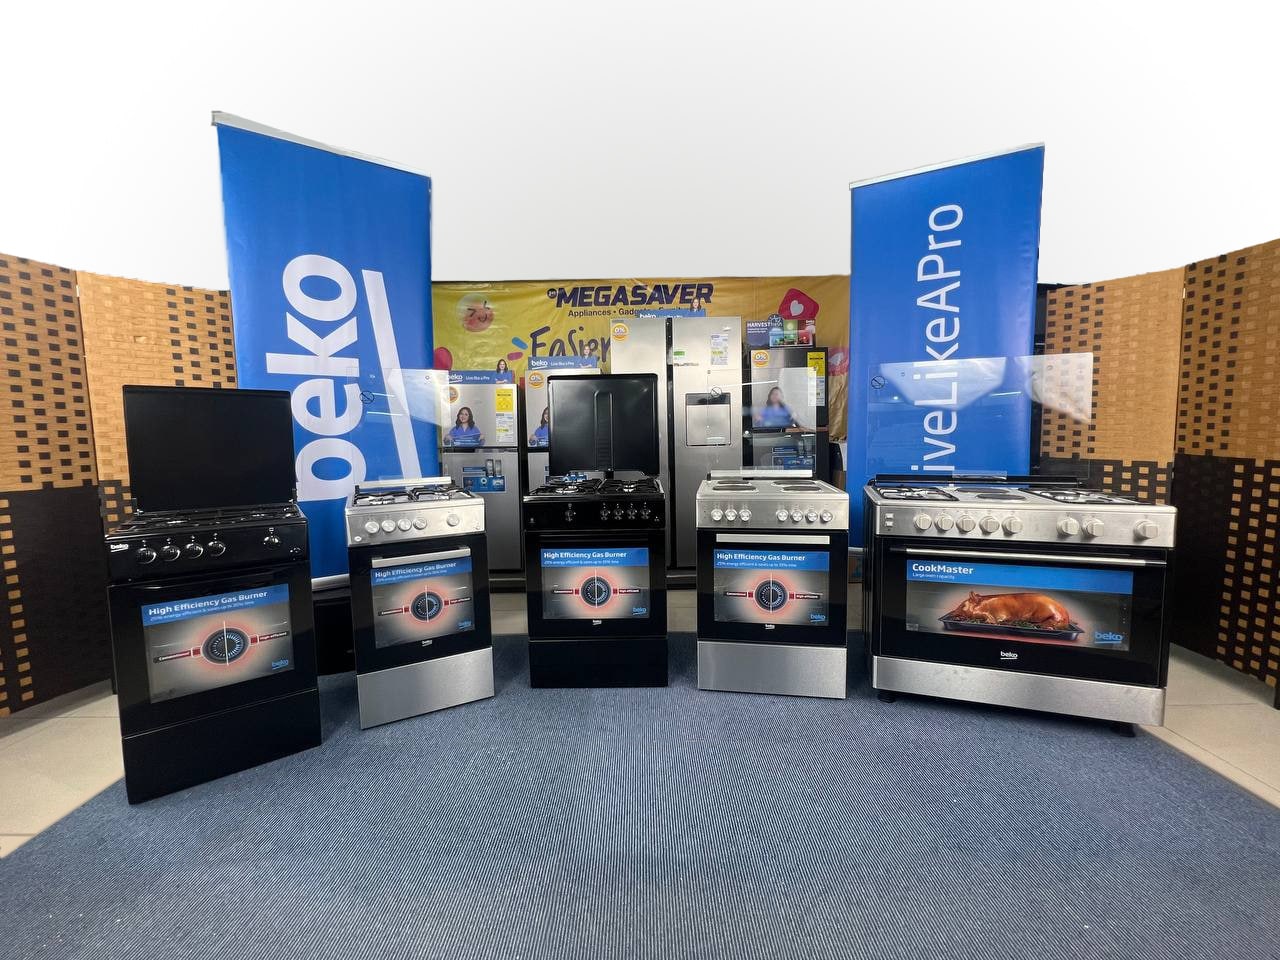 Beko appliances is now available at 1st Megasaver